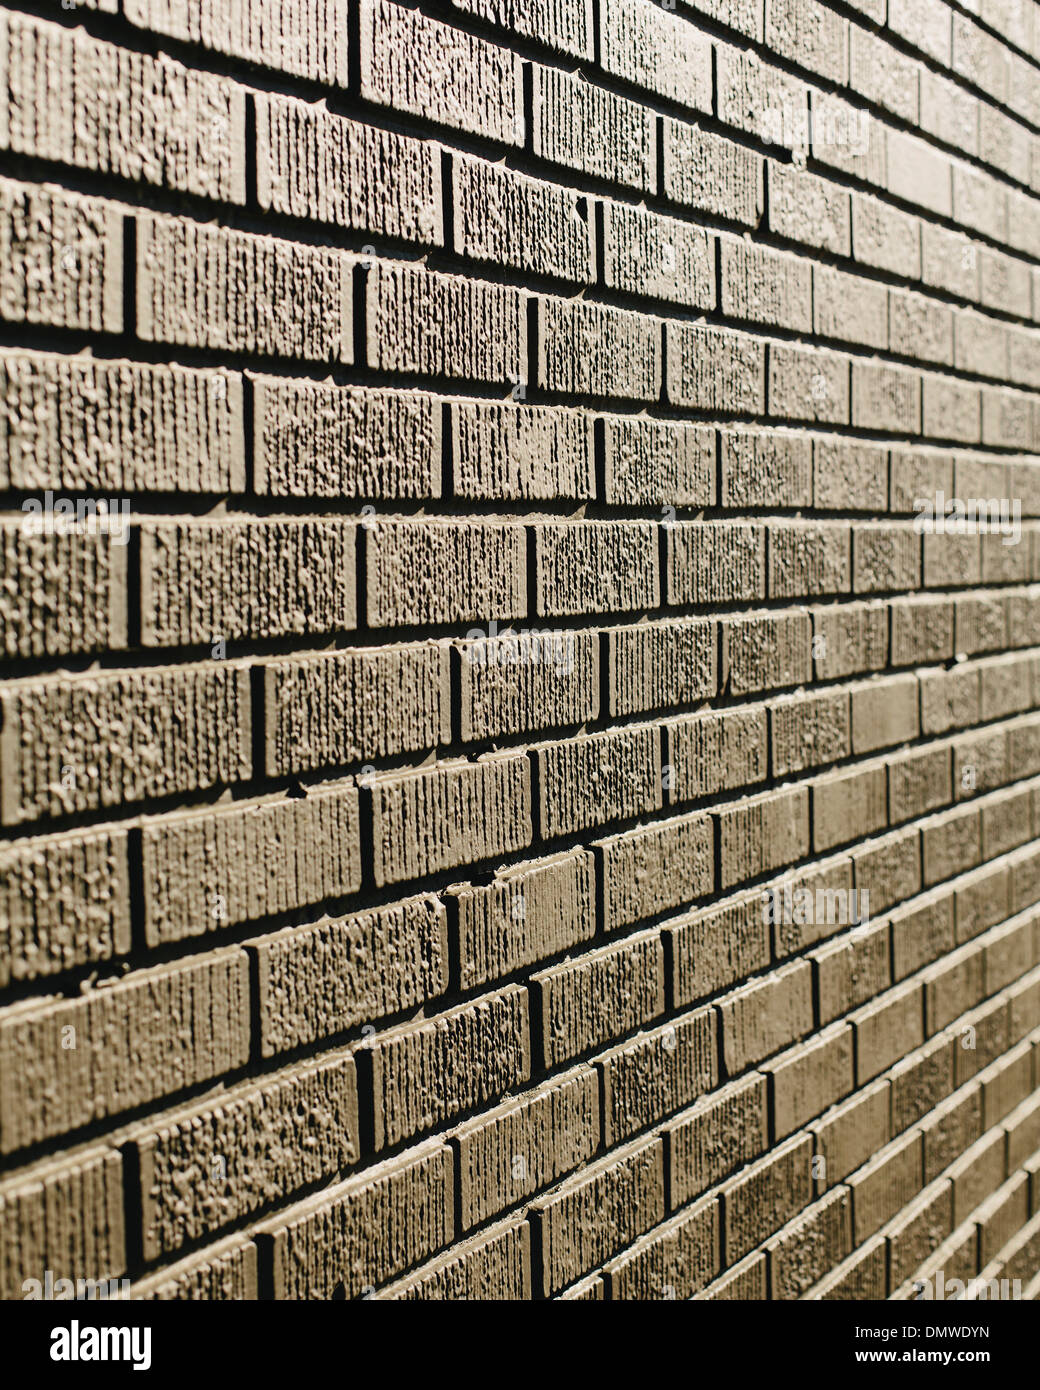 A brown brick wall in a city. Stock Photo